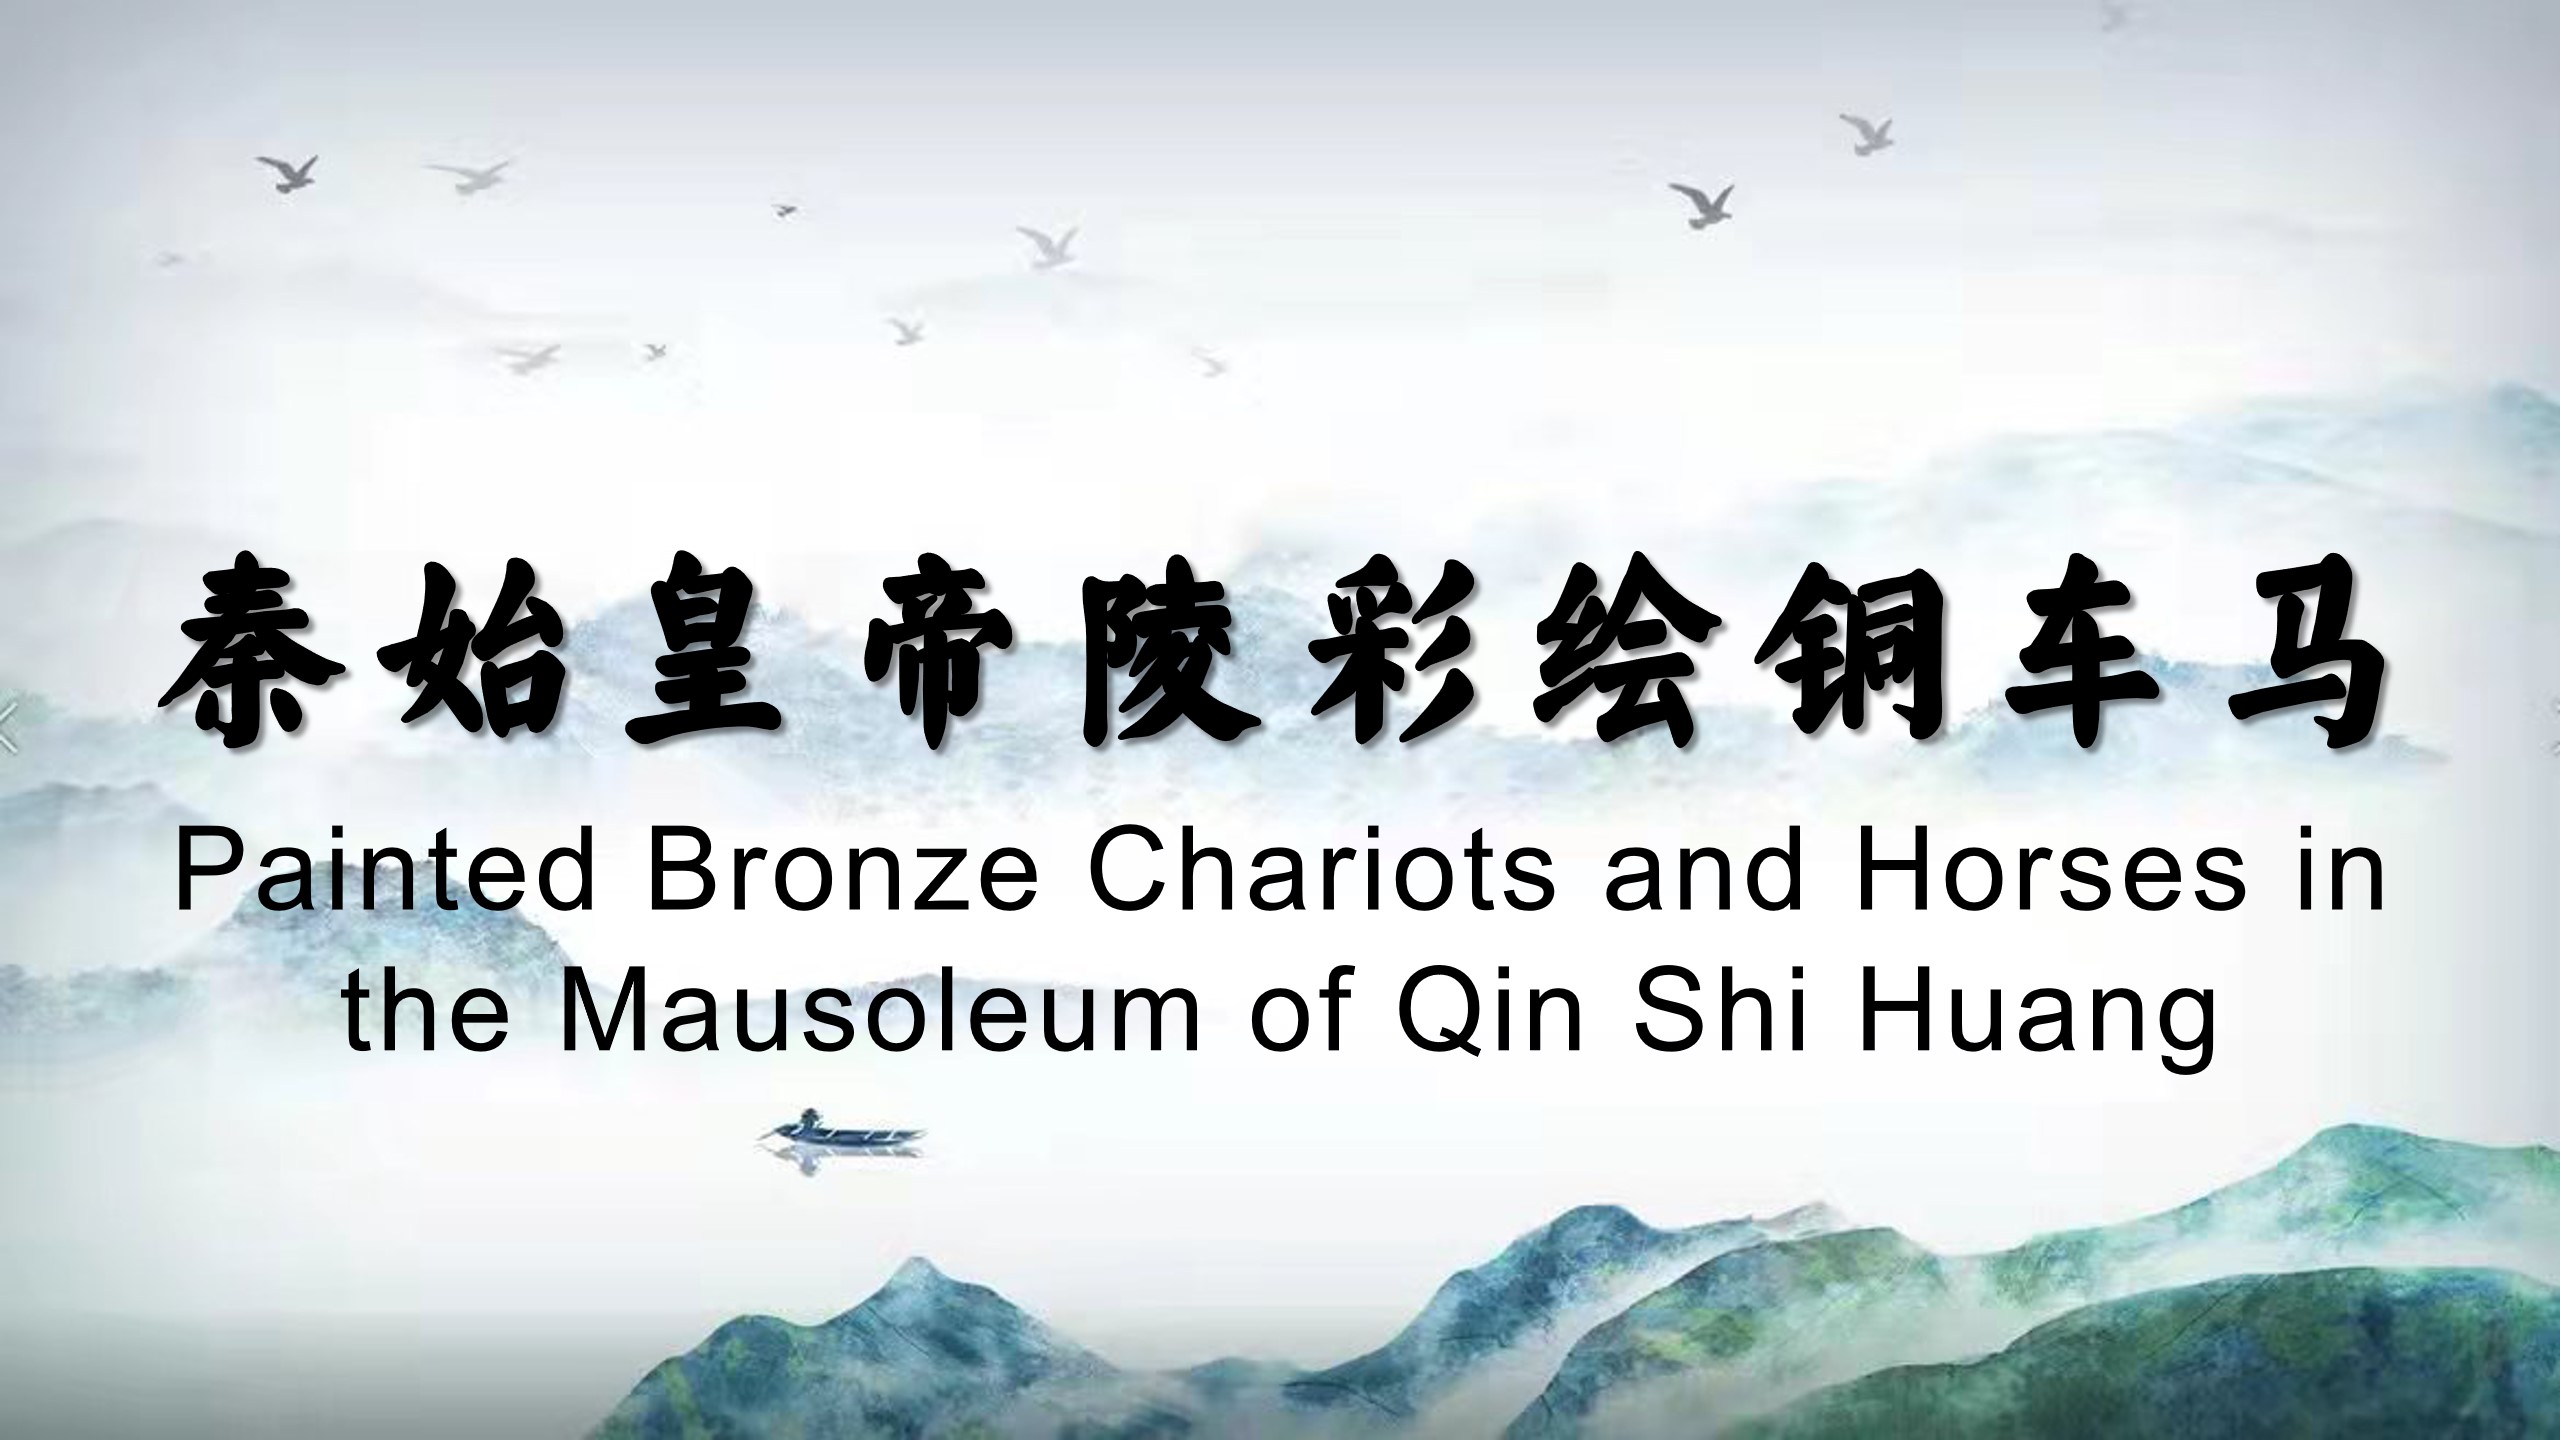 Painted Bronze Chariots and Horses in the Mausoleum of Qin Shi Huang